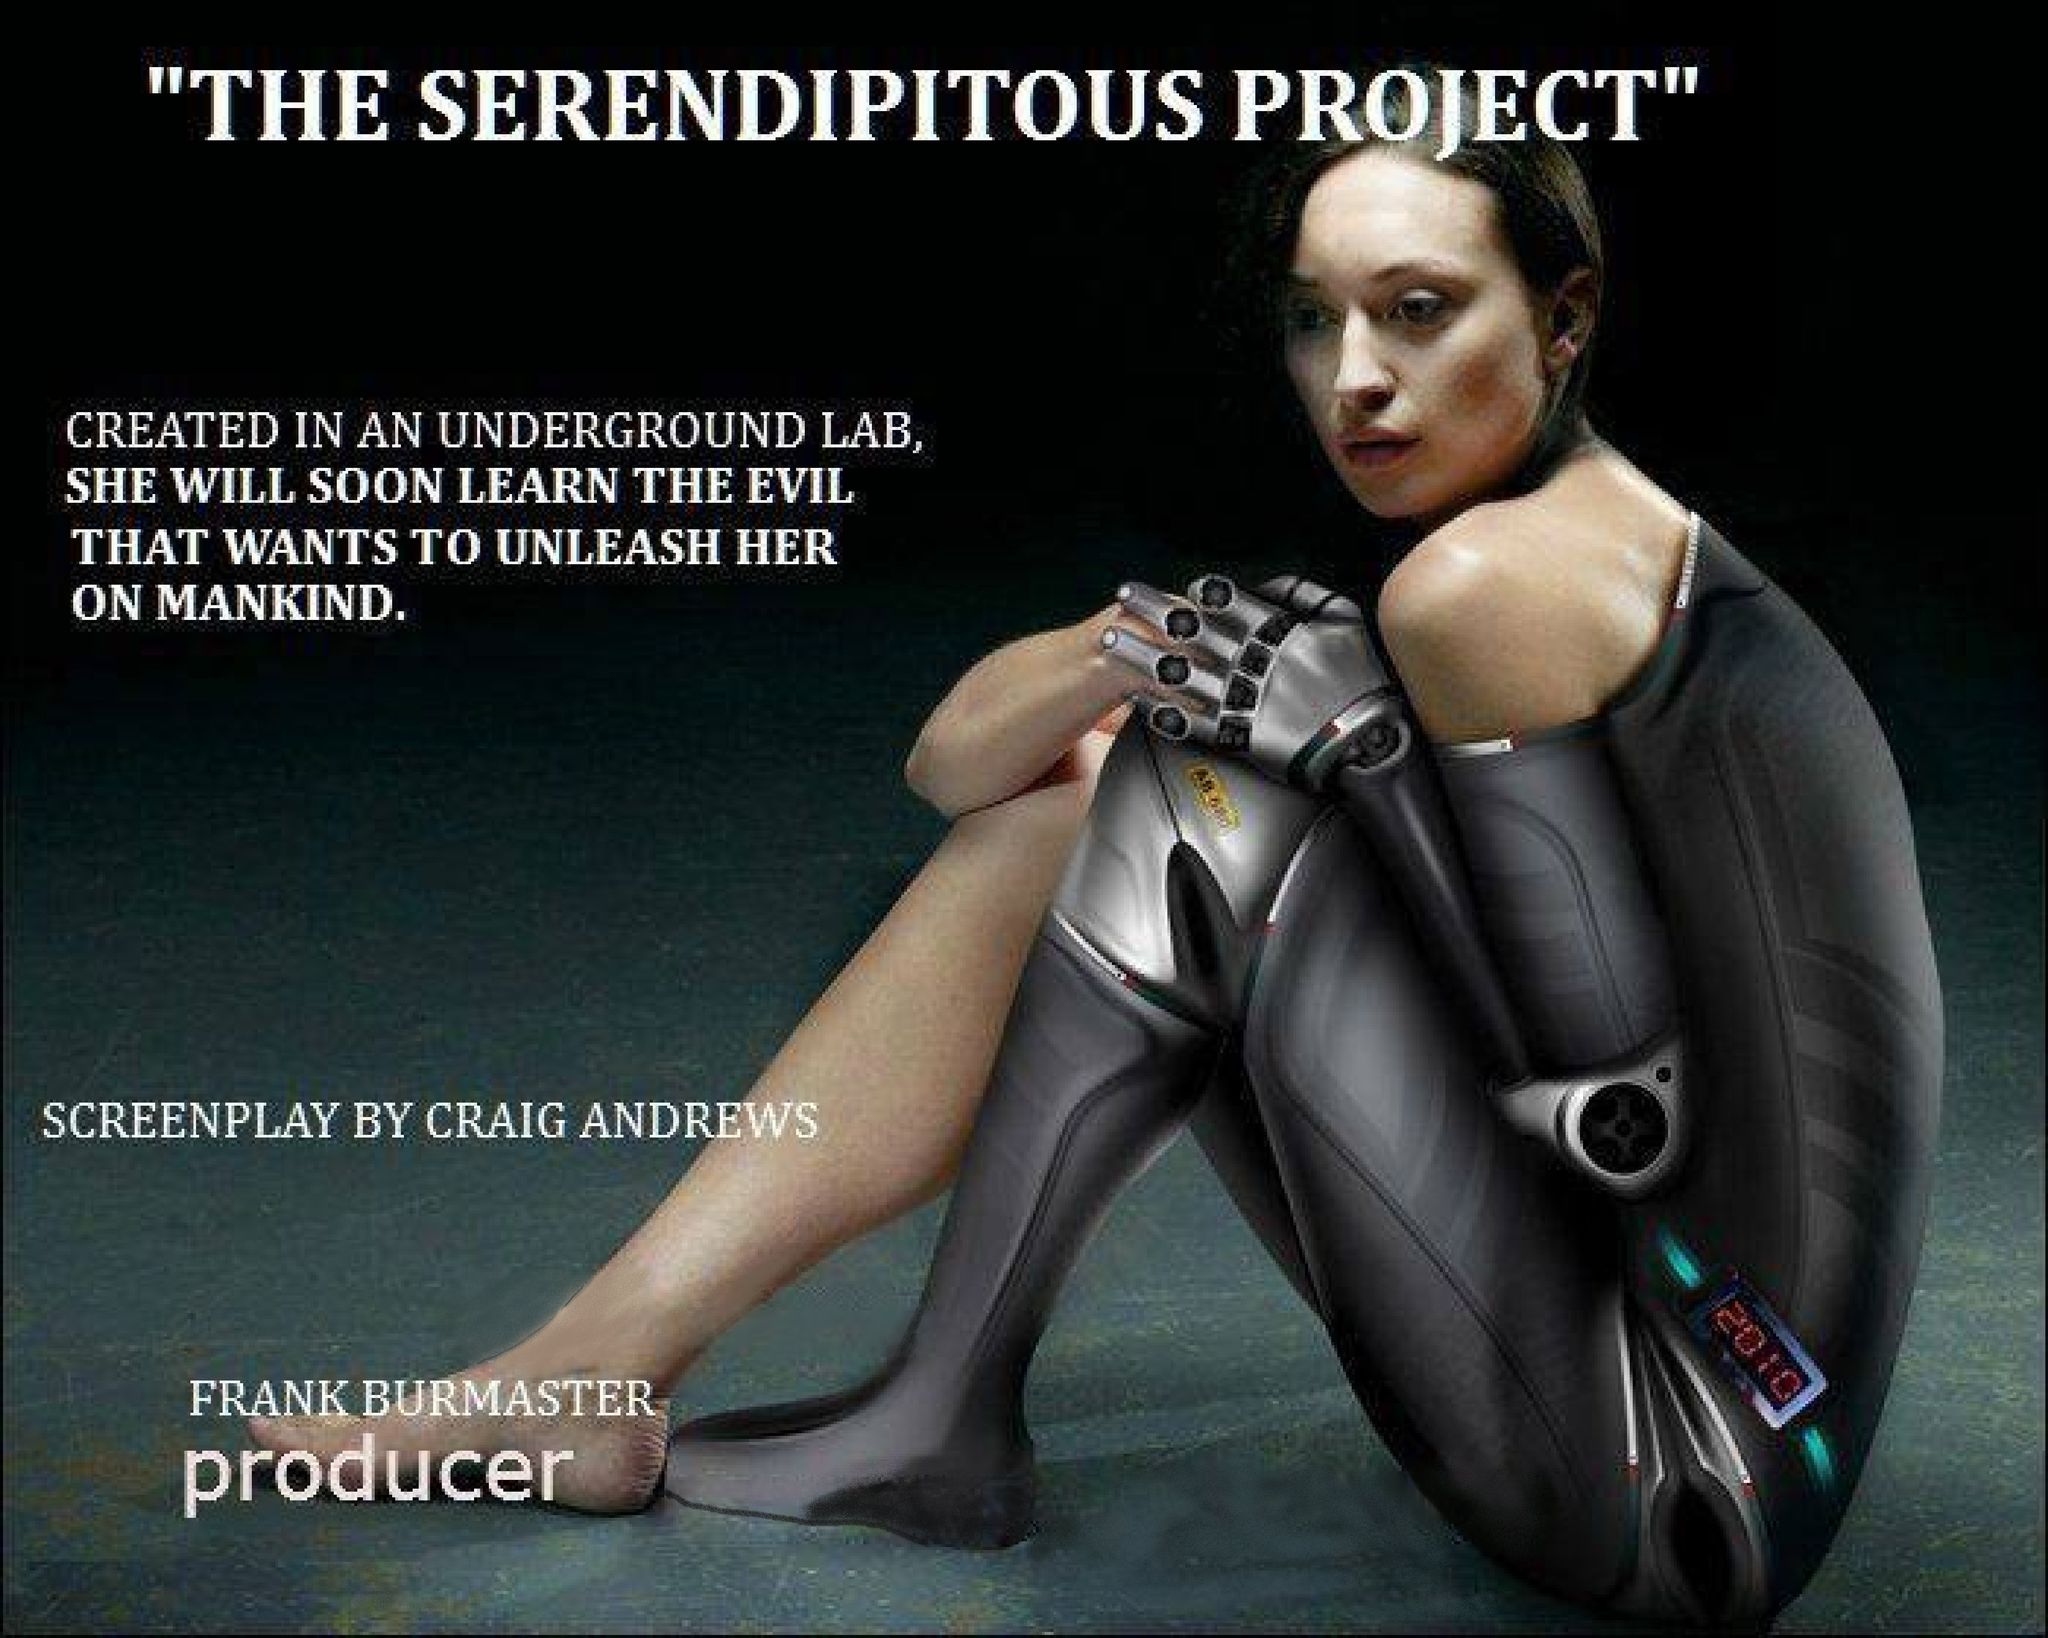 THE SERENDIPITOUS PROJECT (OPTIONED UNDER A DIFFERENT NAME)